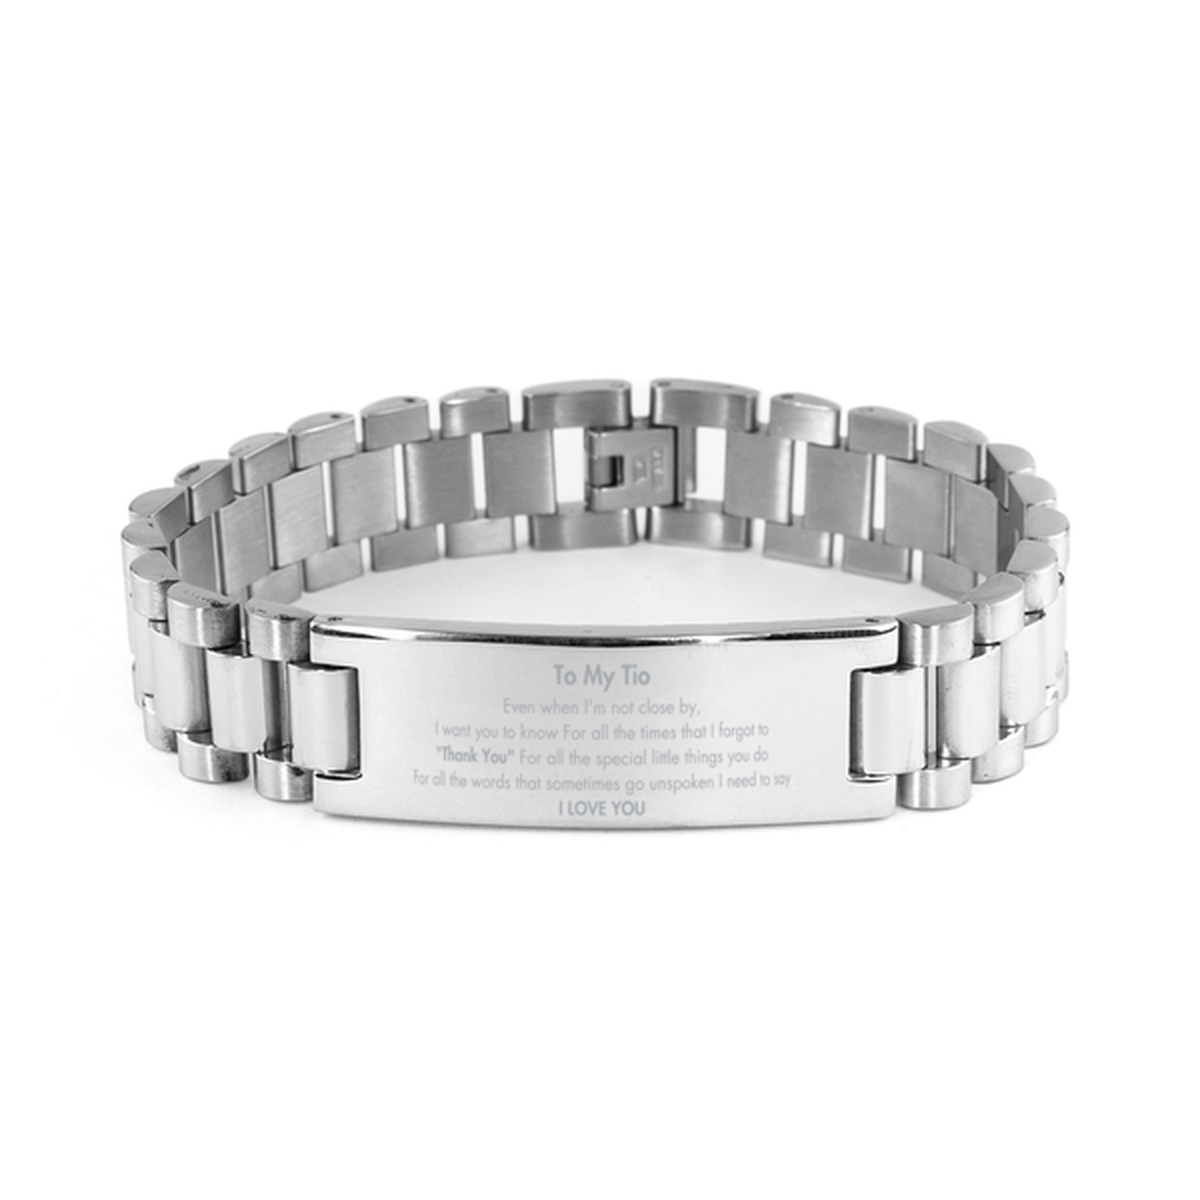 Thank You Gifts for Tio, Keepsake Ladder Stainless Steel Bracelet Gifts for Tio Birthday Mother's day Father's Day Tio For all the words That sometimes go unspoken I need to say I LOVE YOU